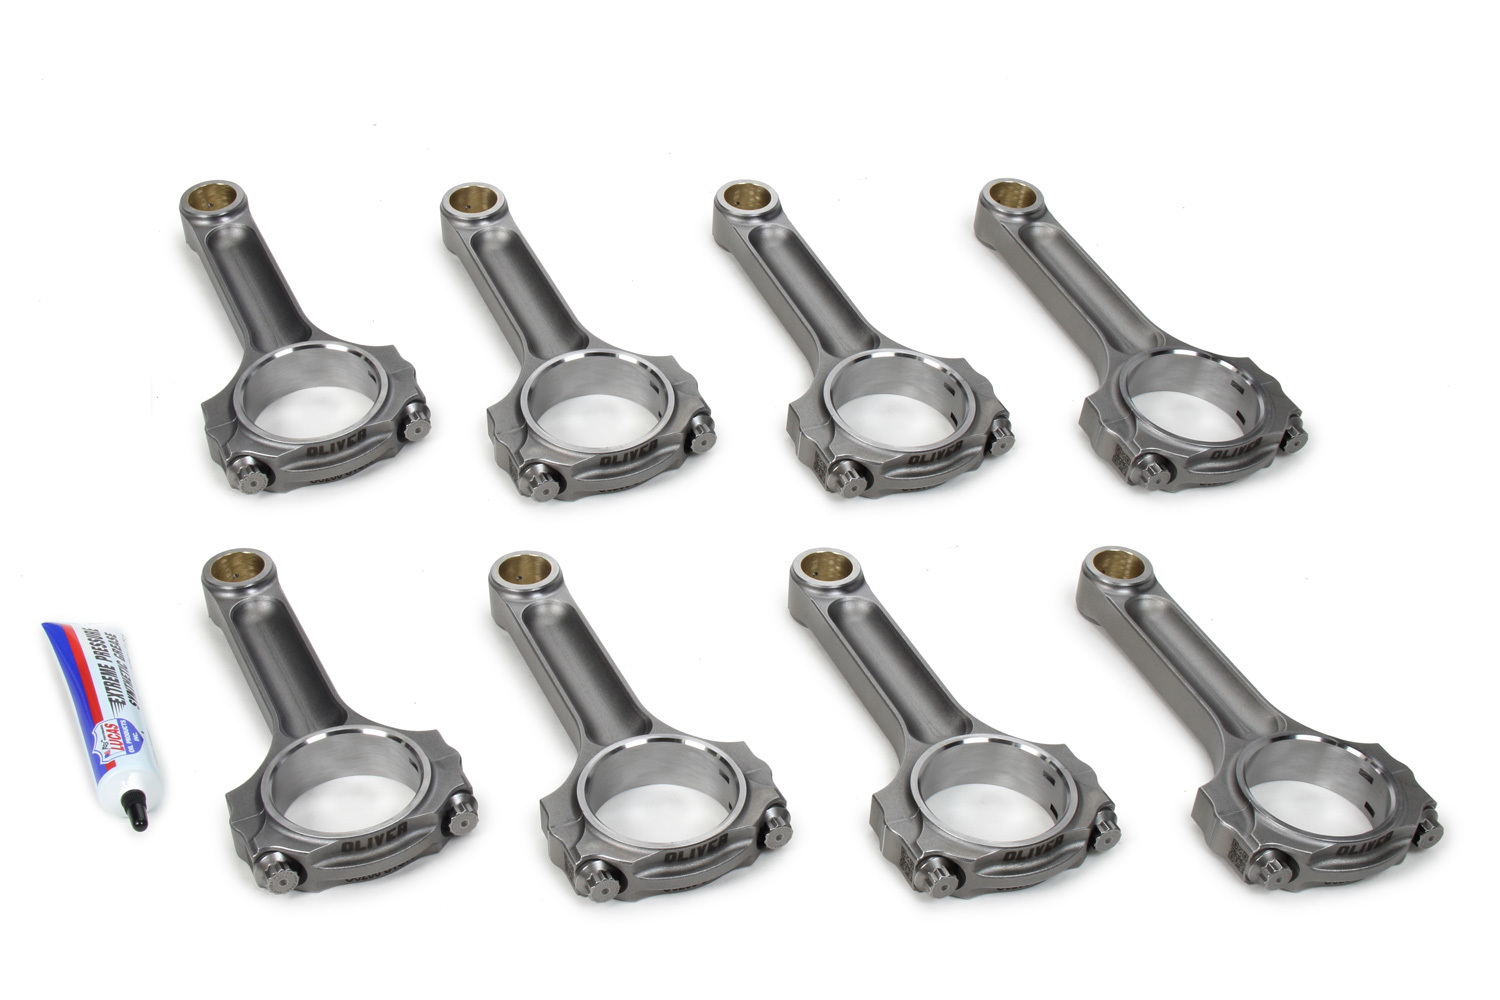 Oliver Rods C6000Q4UL8 Connecting Rod, Ultra Light, I Beam, 6.000 in Long, Bushed, 3/8 in Cap Screws, Steel, Natural, Small Block Chevy, Set of 8